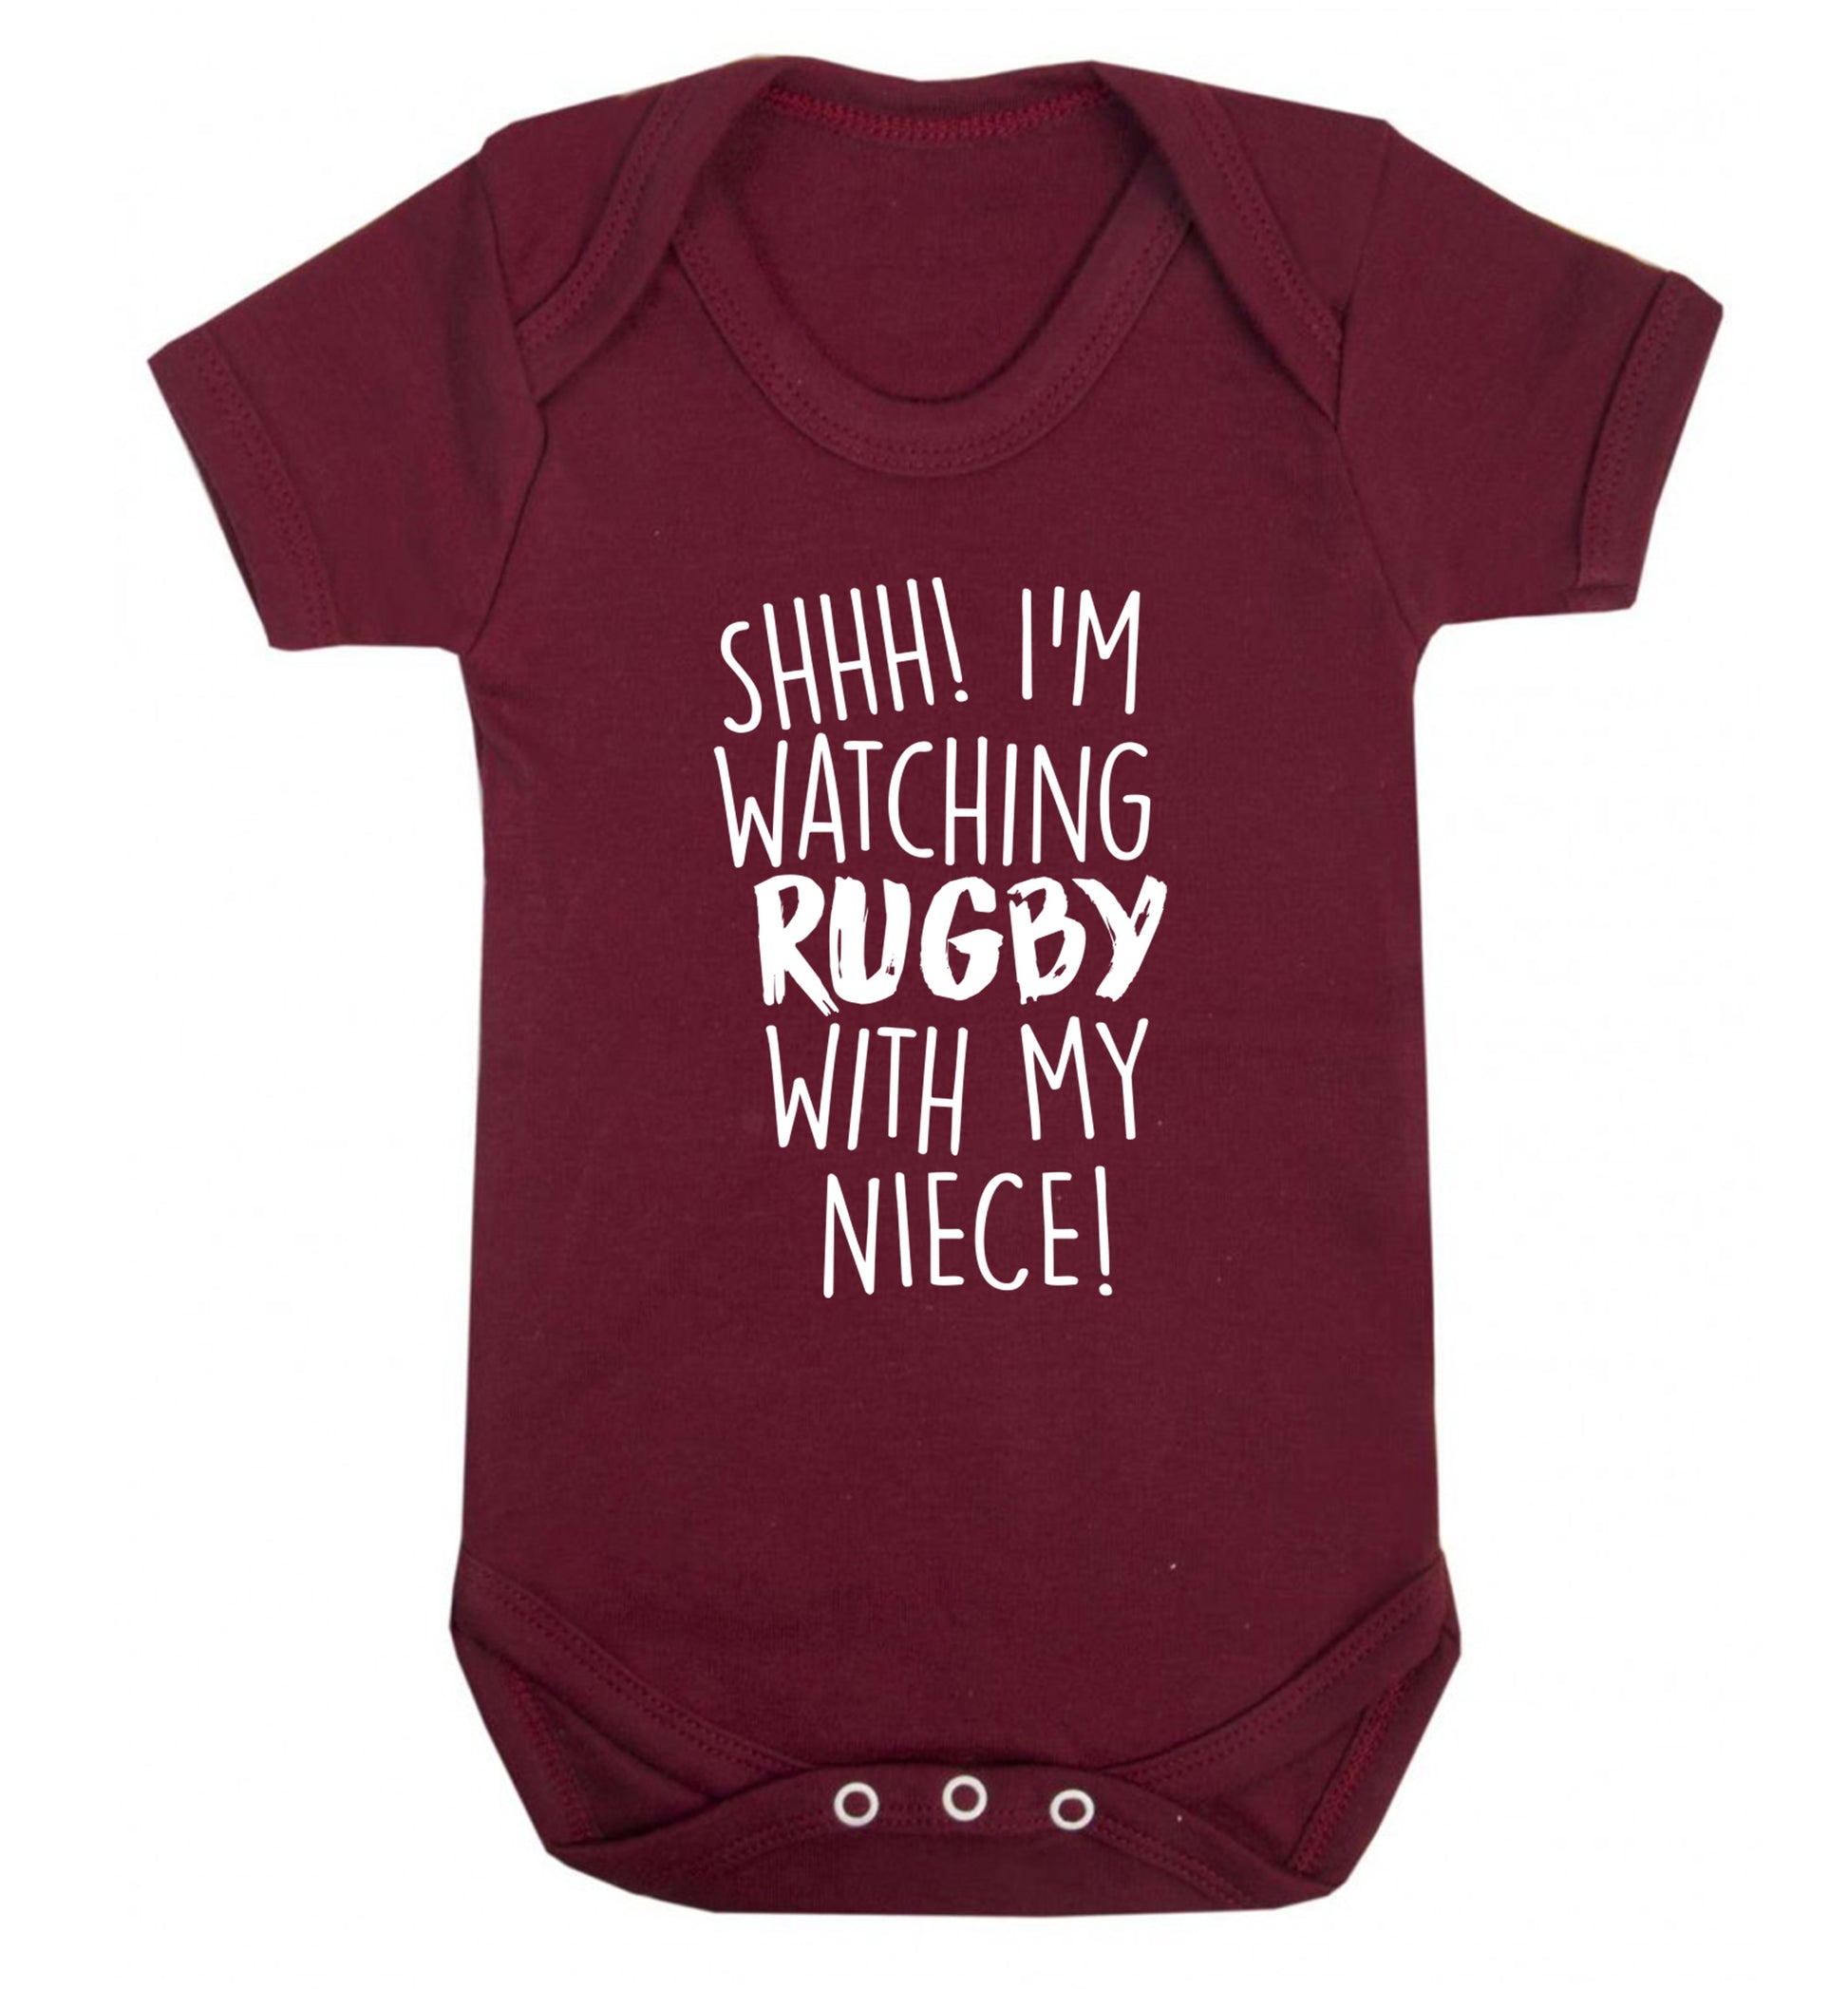 Shh.. I'm watching rugby with my niece Baby Vest maroon 18-24 months